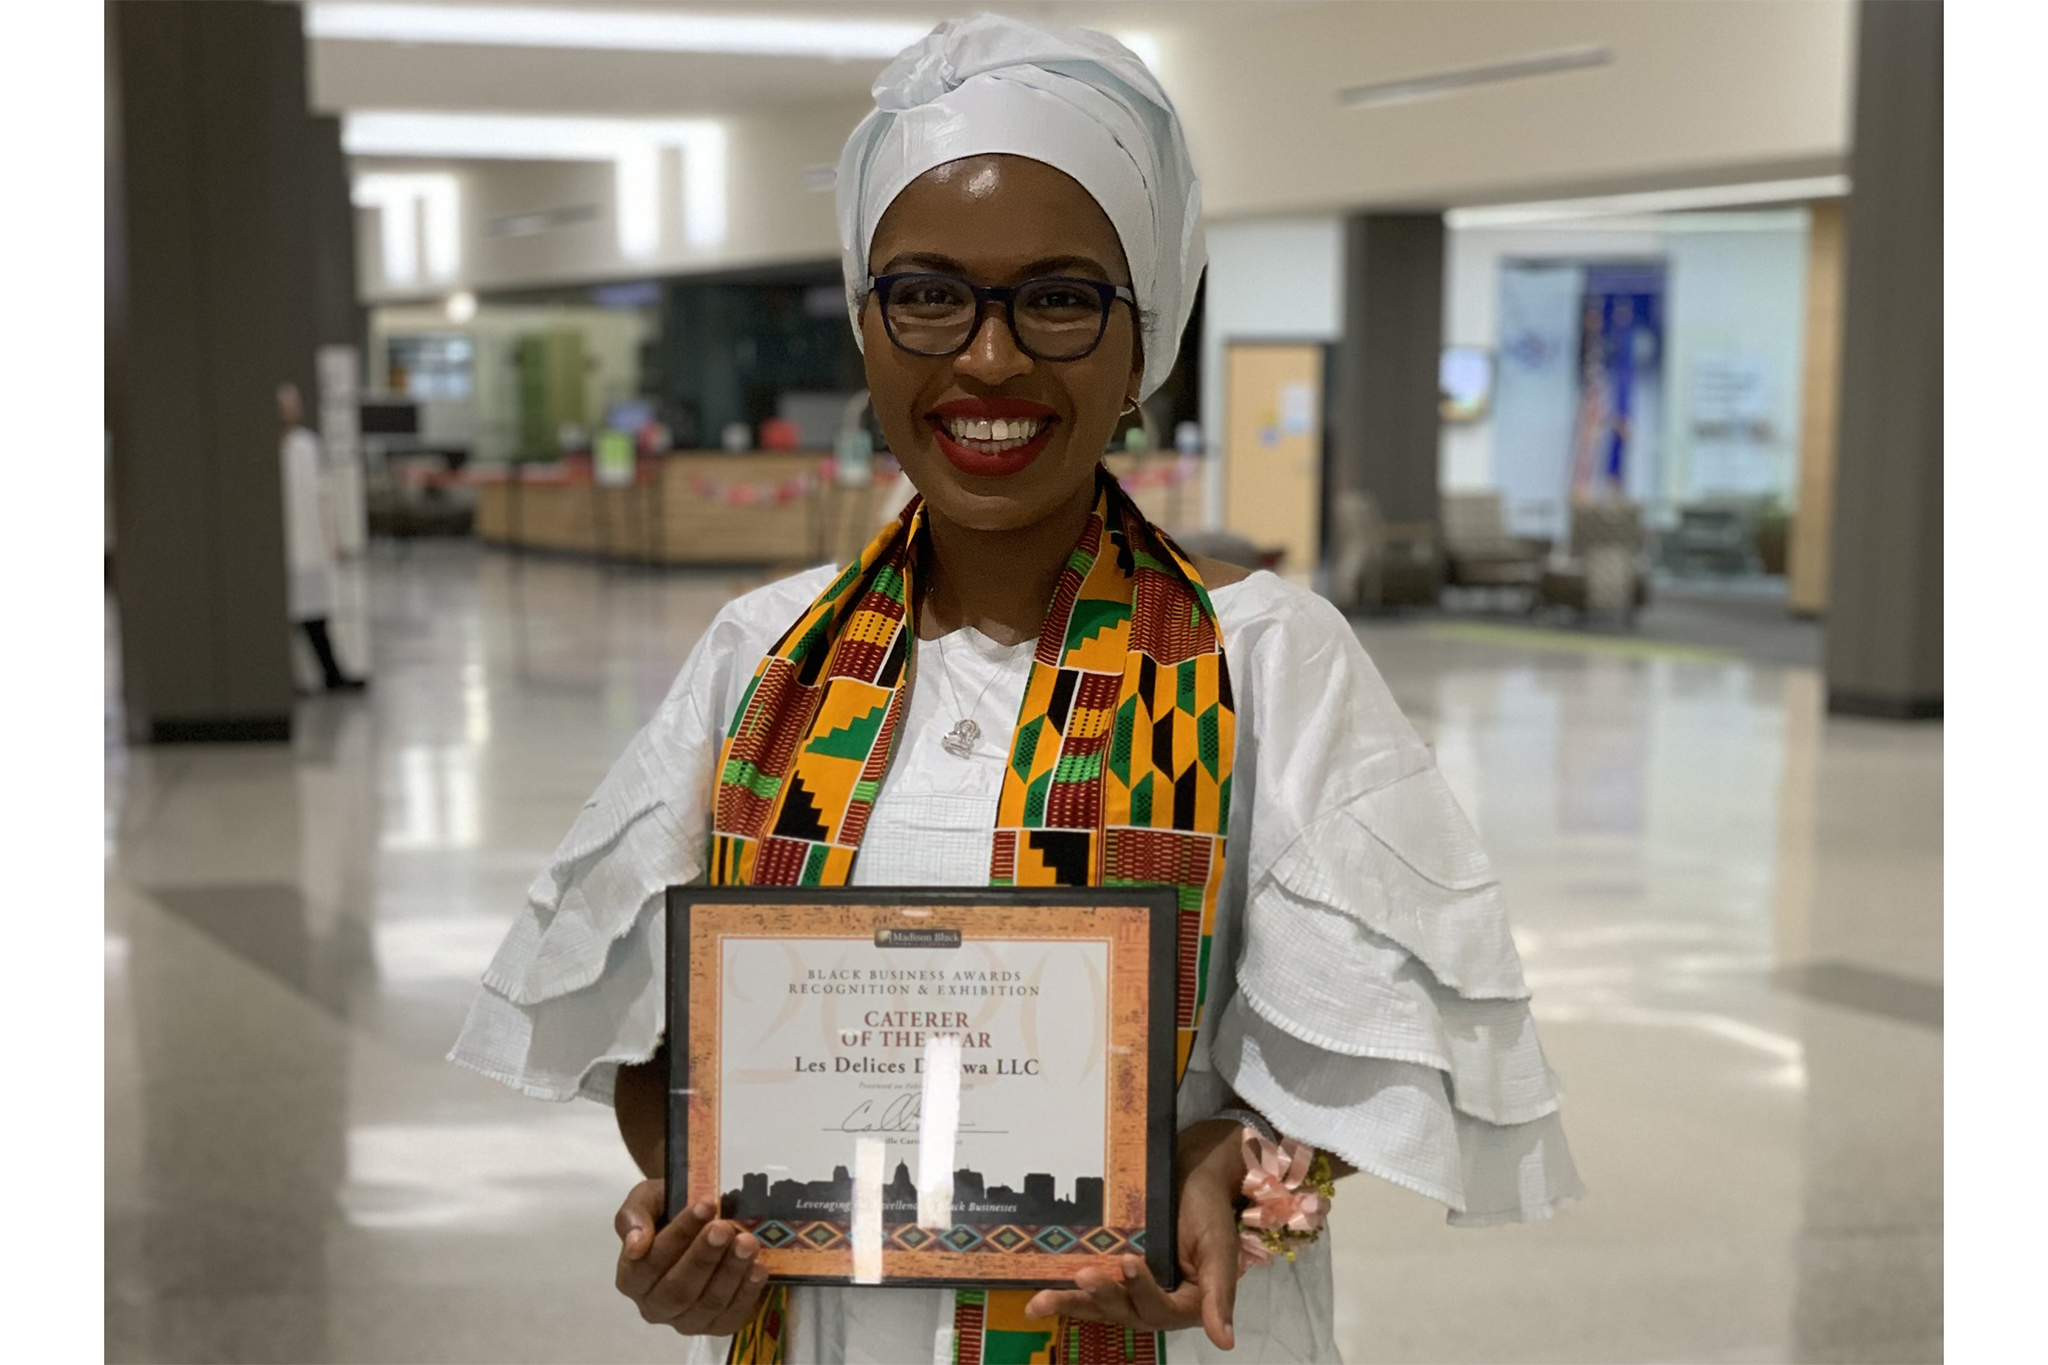 Awa Sibi was named Caterer of the Year by the Madison Black Chamber of Commerce in 2020. She is opening a West African restaurant on Atwood Avenue in January 2024 after graduating from United Way of Dane County's (also in 53704) Boardwalk Academy. In "Awa's Story" the restaurateur describes the importance of that experience.